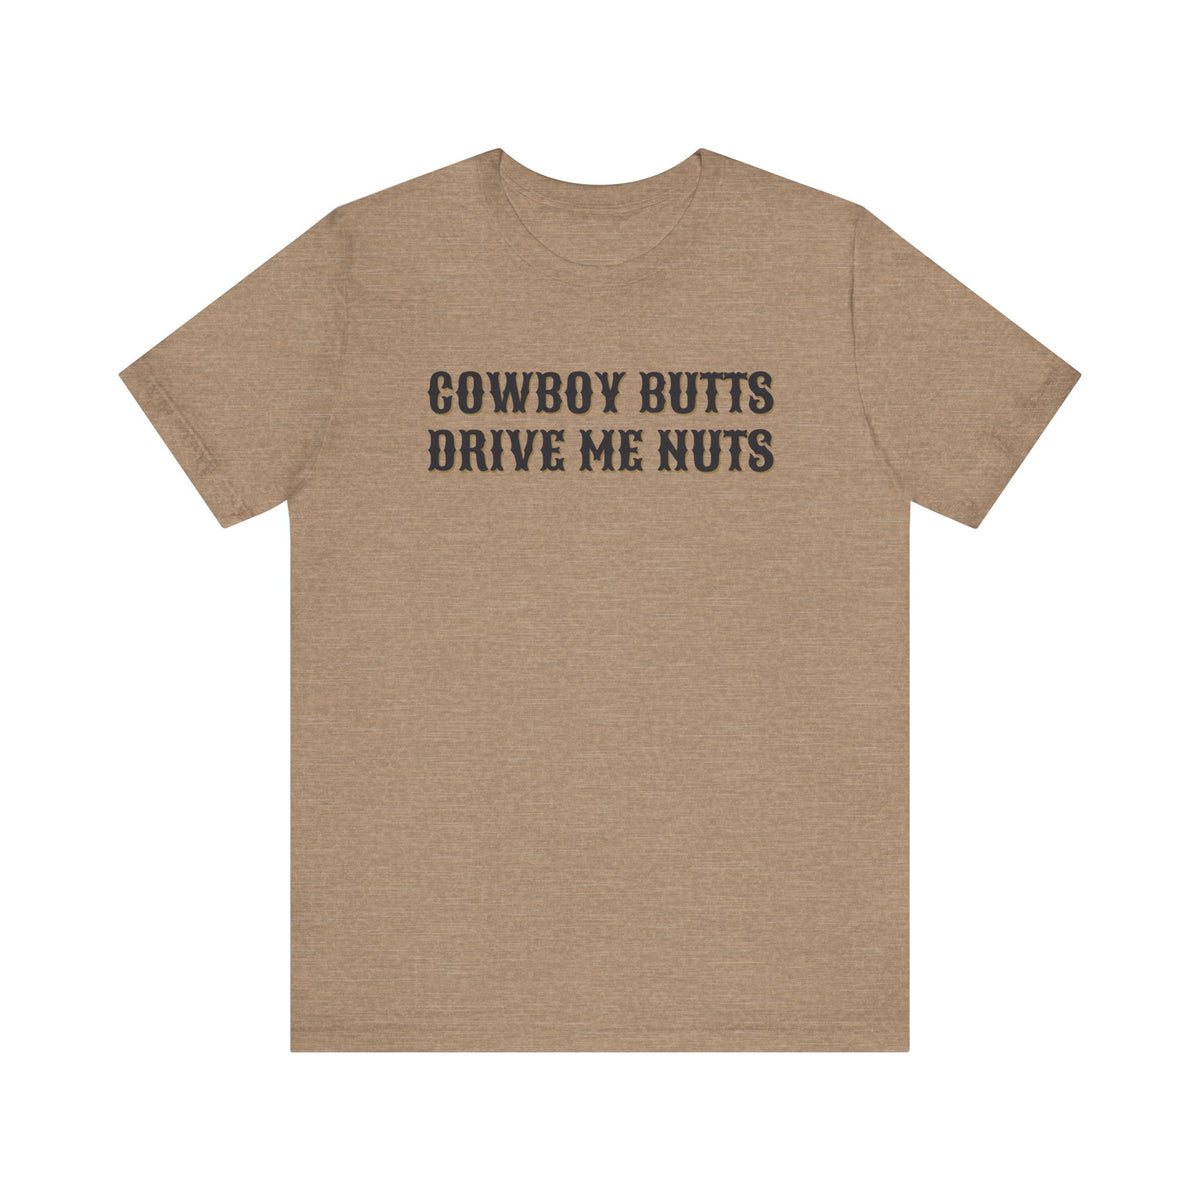 Cowboy Butts Drive Me Nuts Tee | Women's Western Graphic T-shirt | Country Graphic Tees